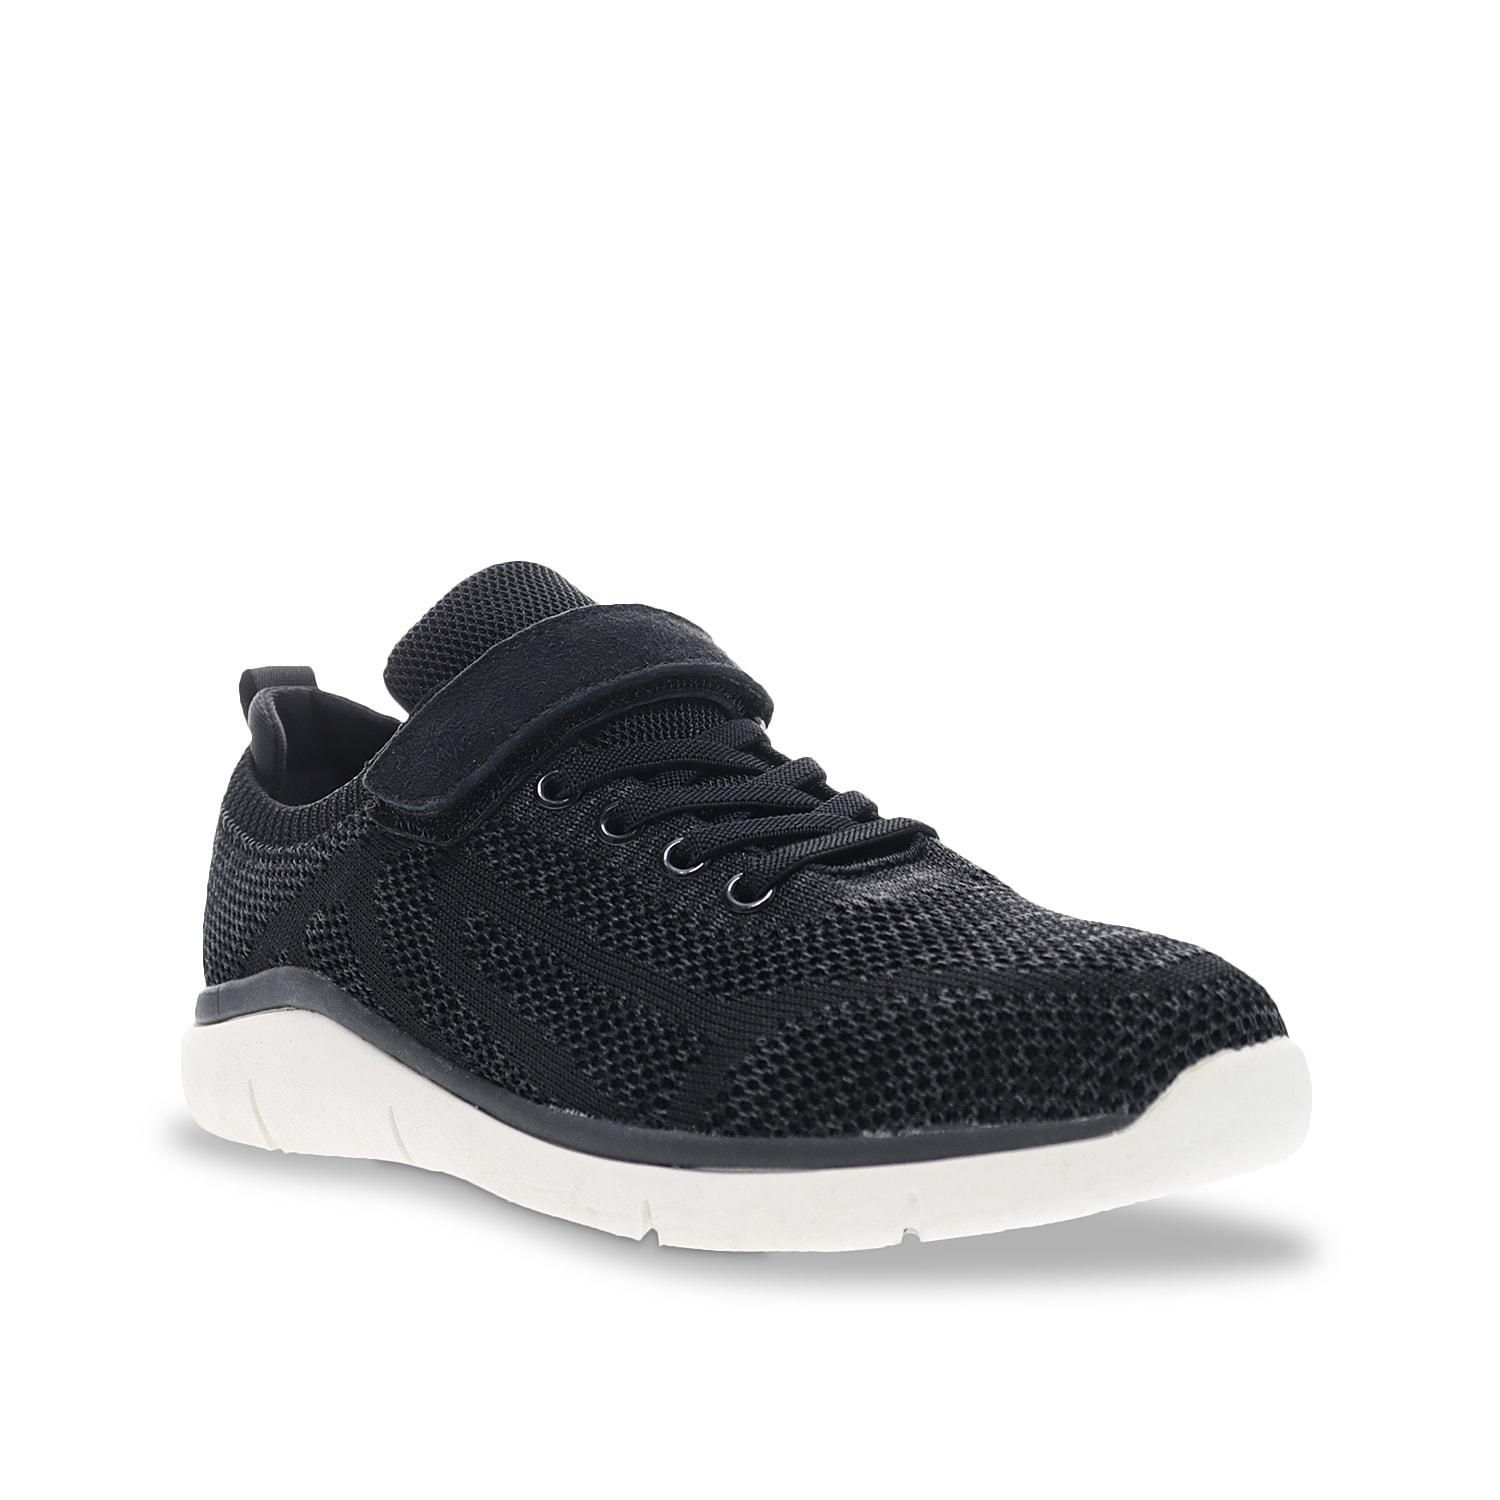 Propt Stevie Sneaker Product Image